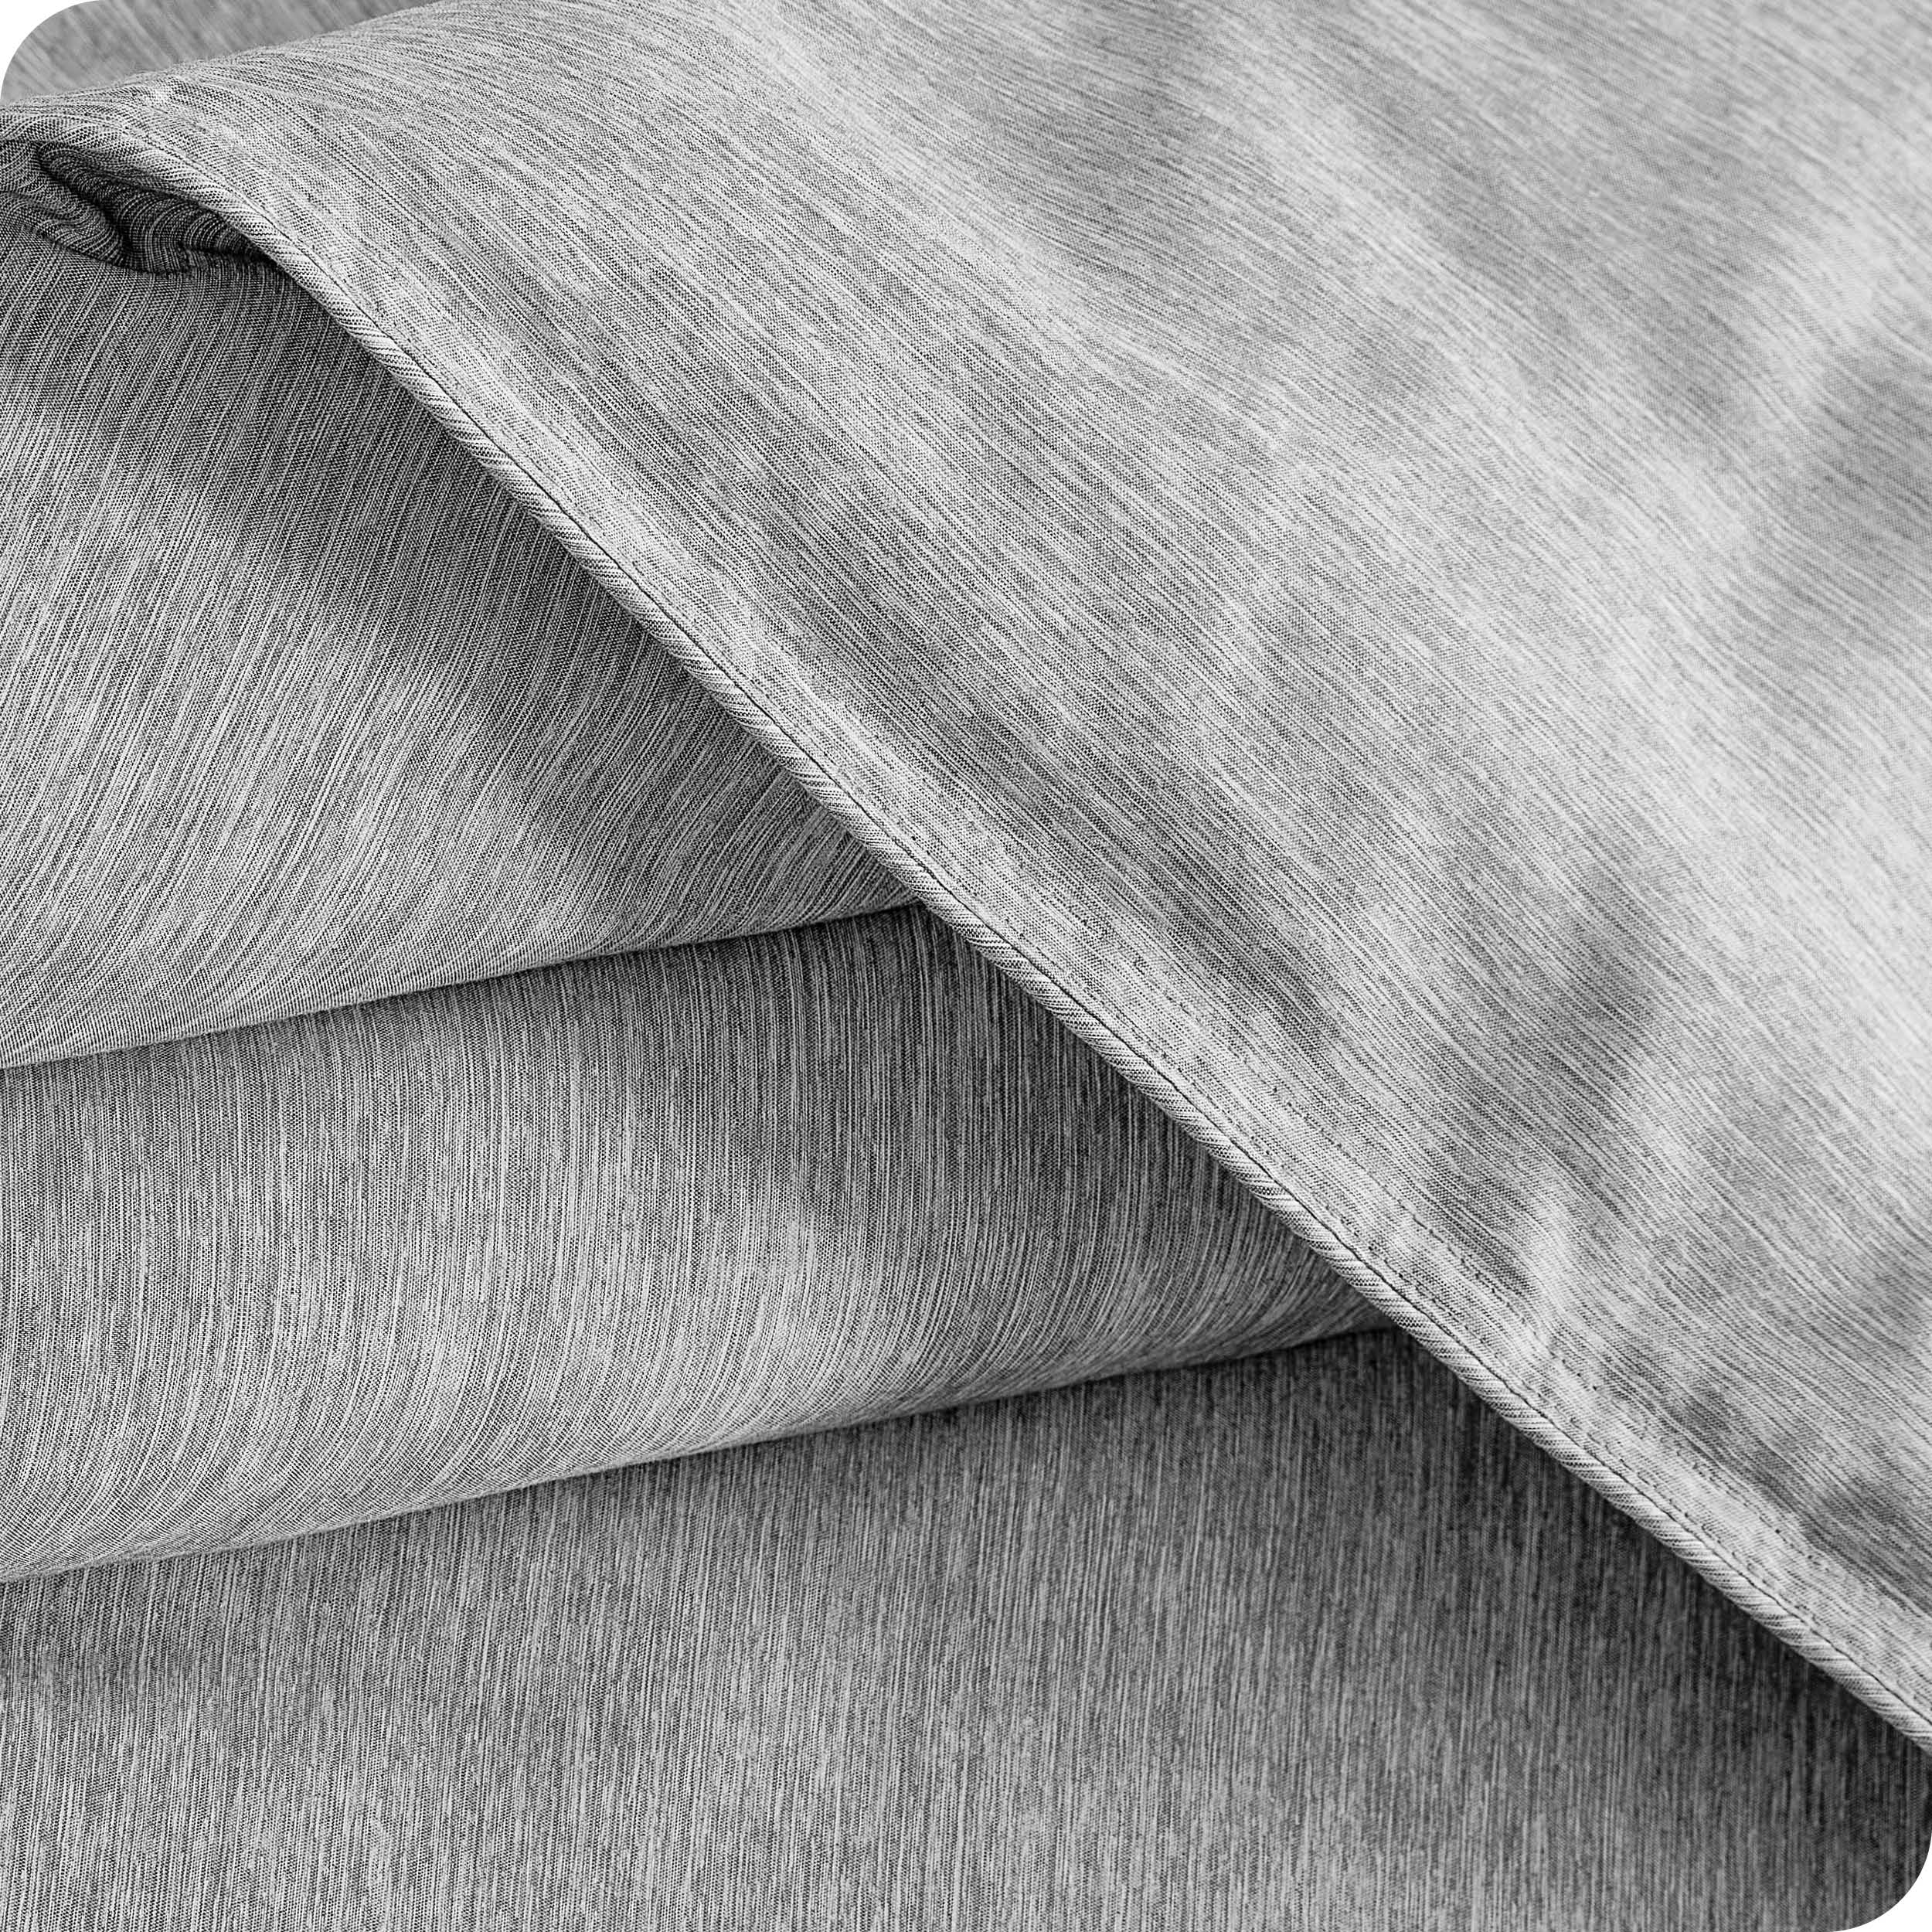 Close up of a microfiber comforter folded over itself